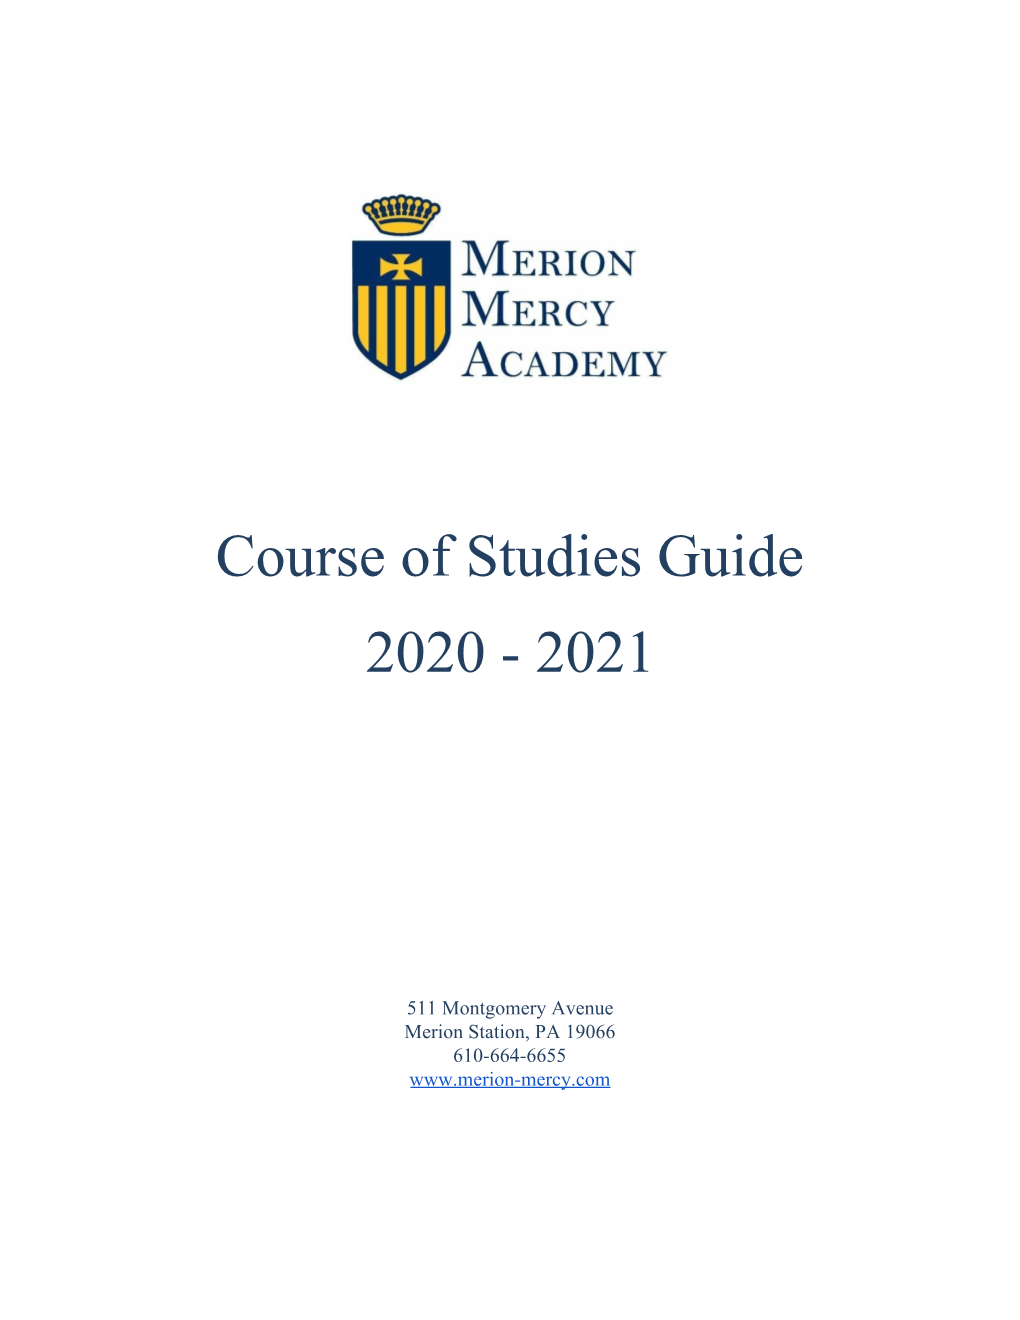 Course of Studies Guide 2020